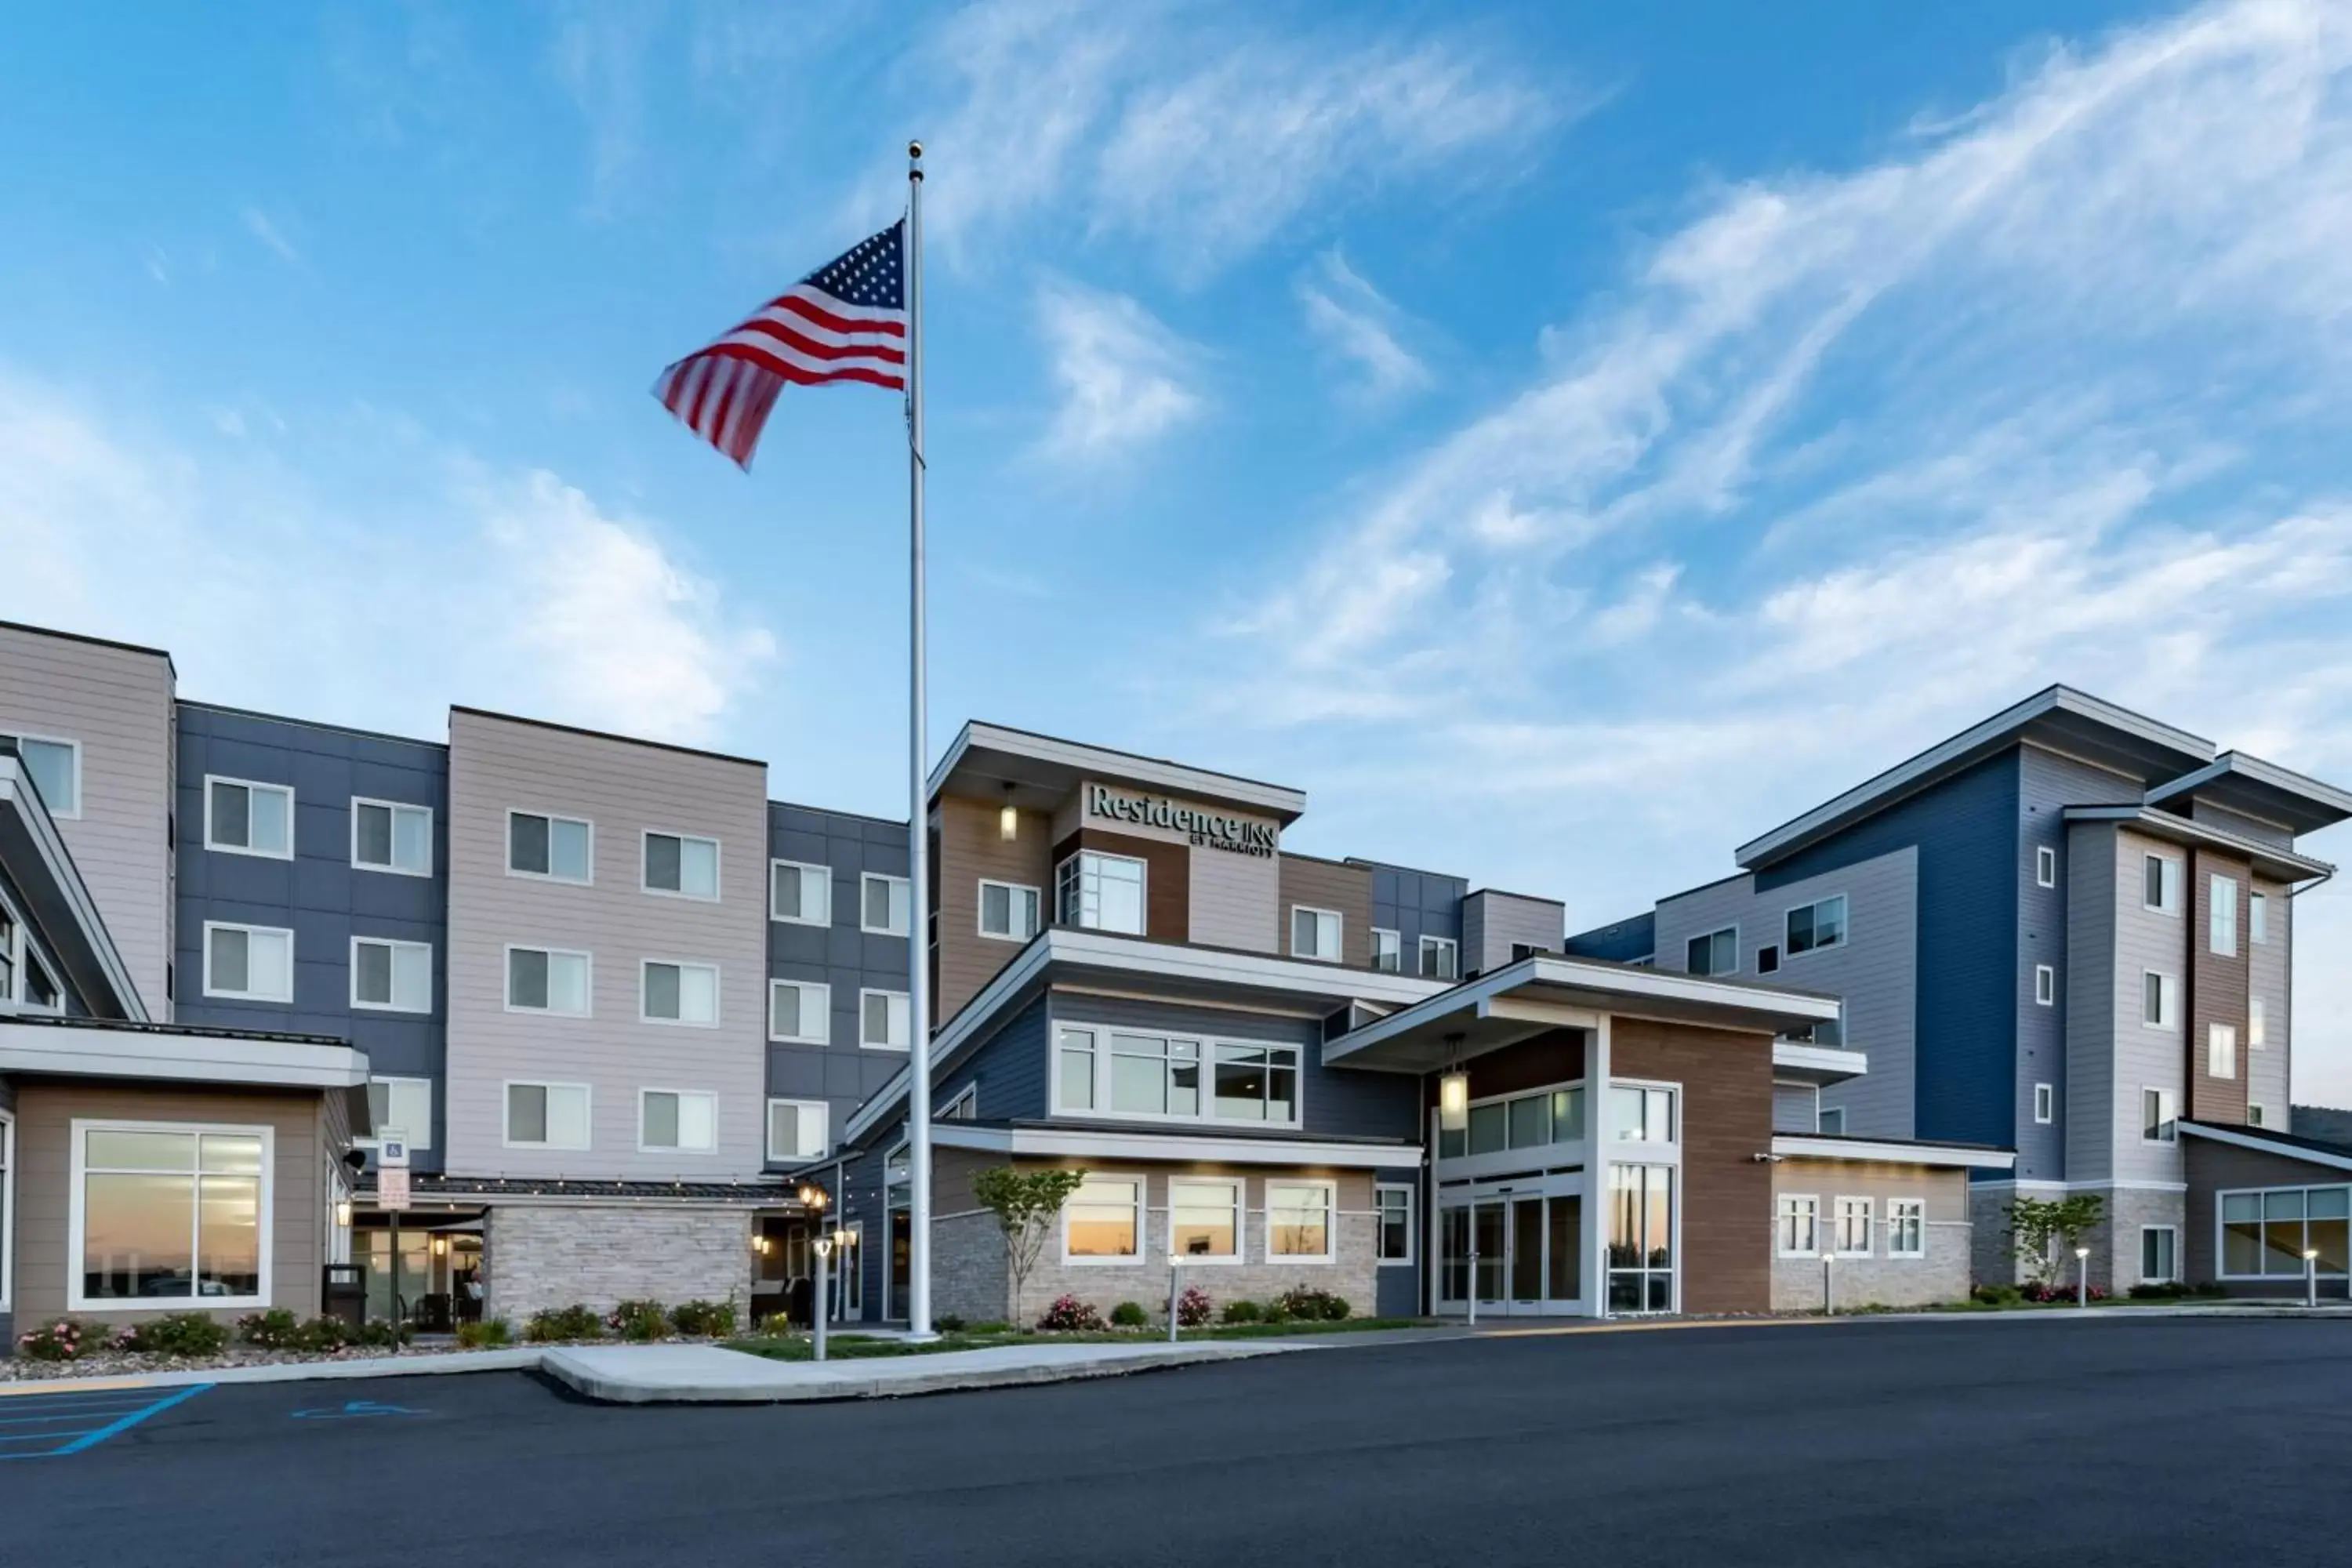 Property Building in Residence Inn by Marriott Wilkes-Barre Arena